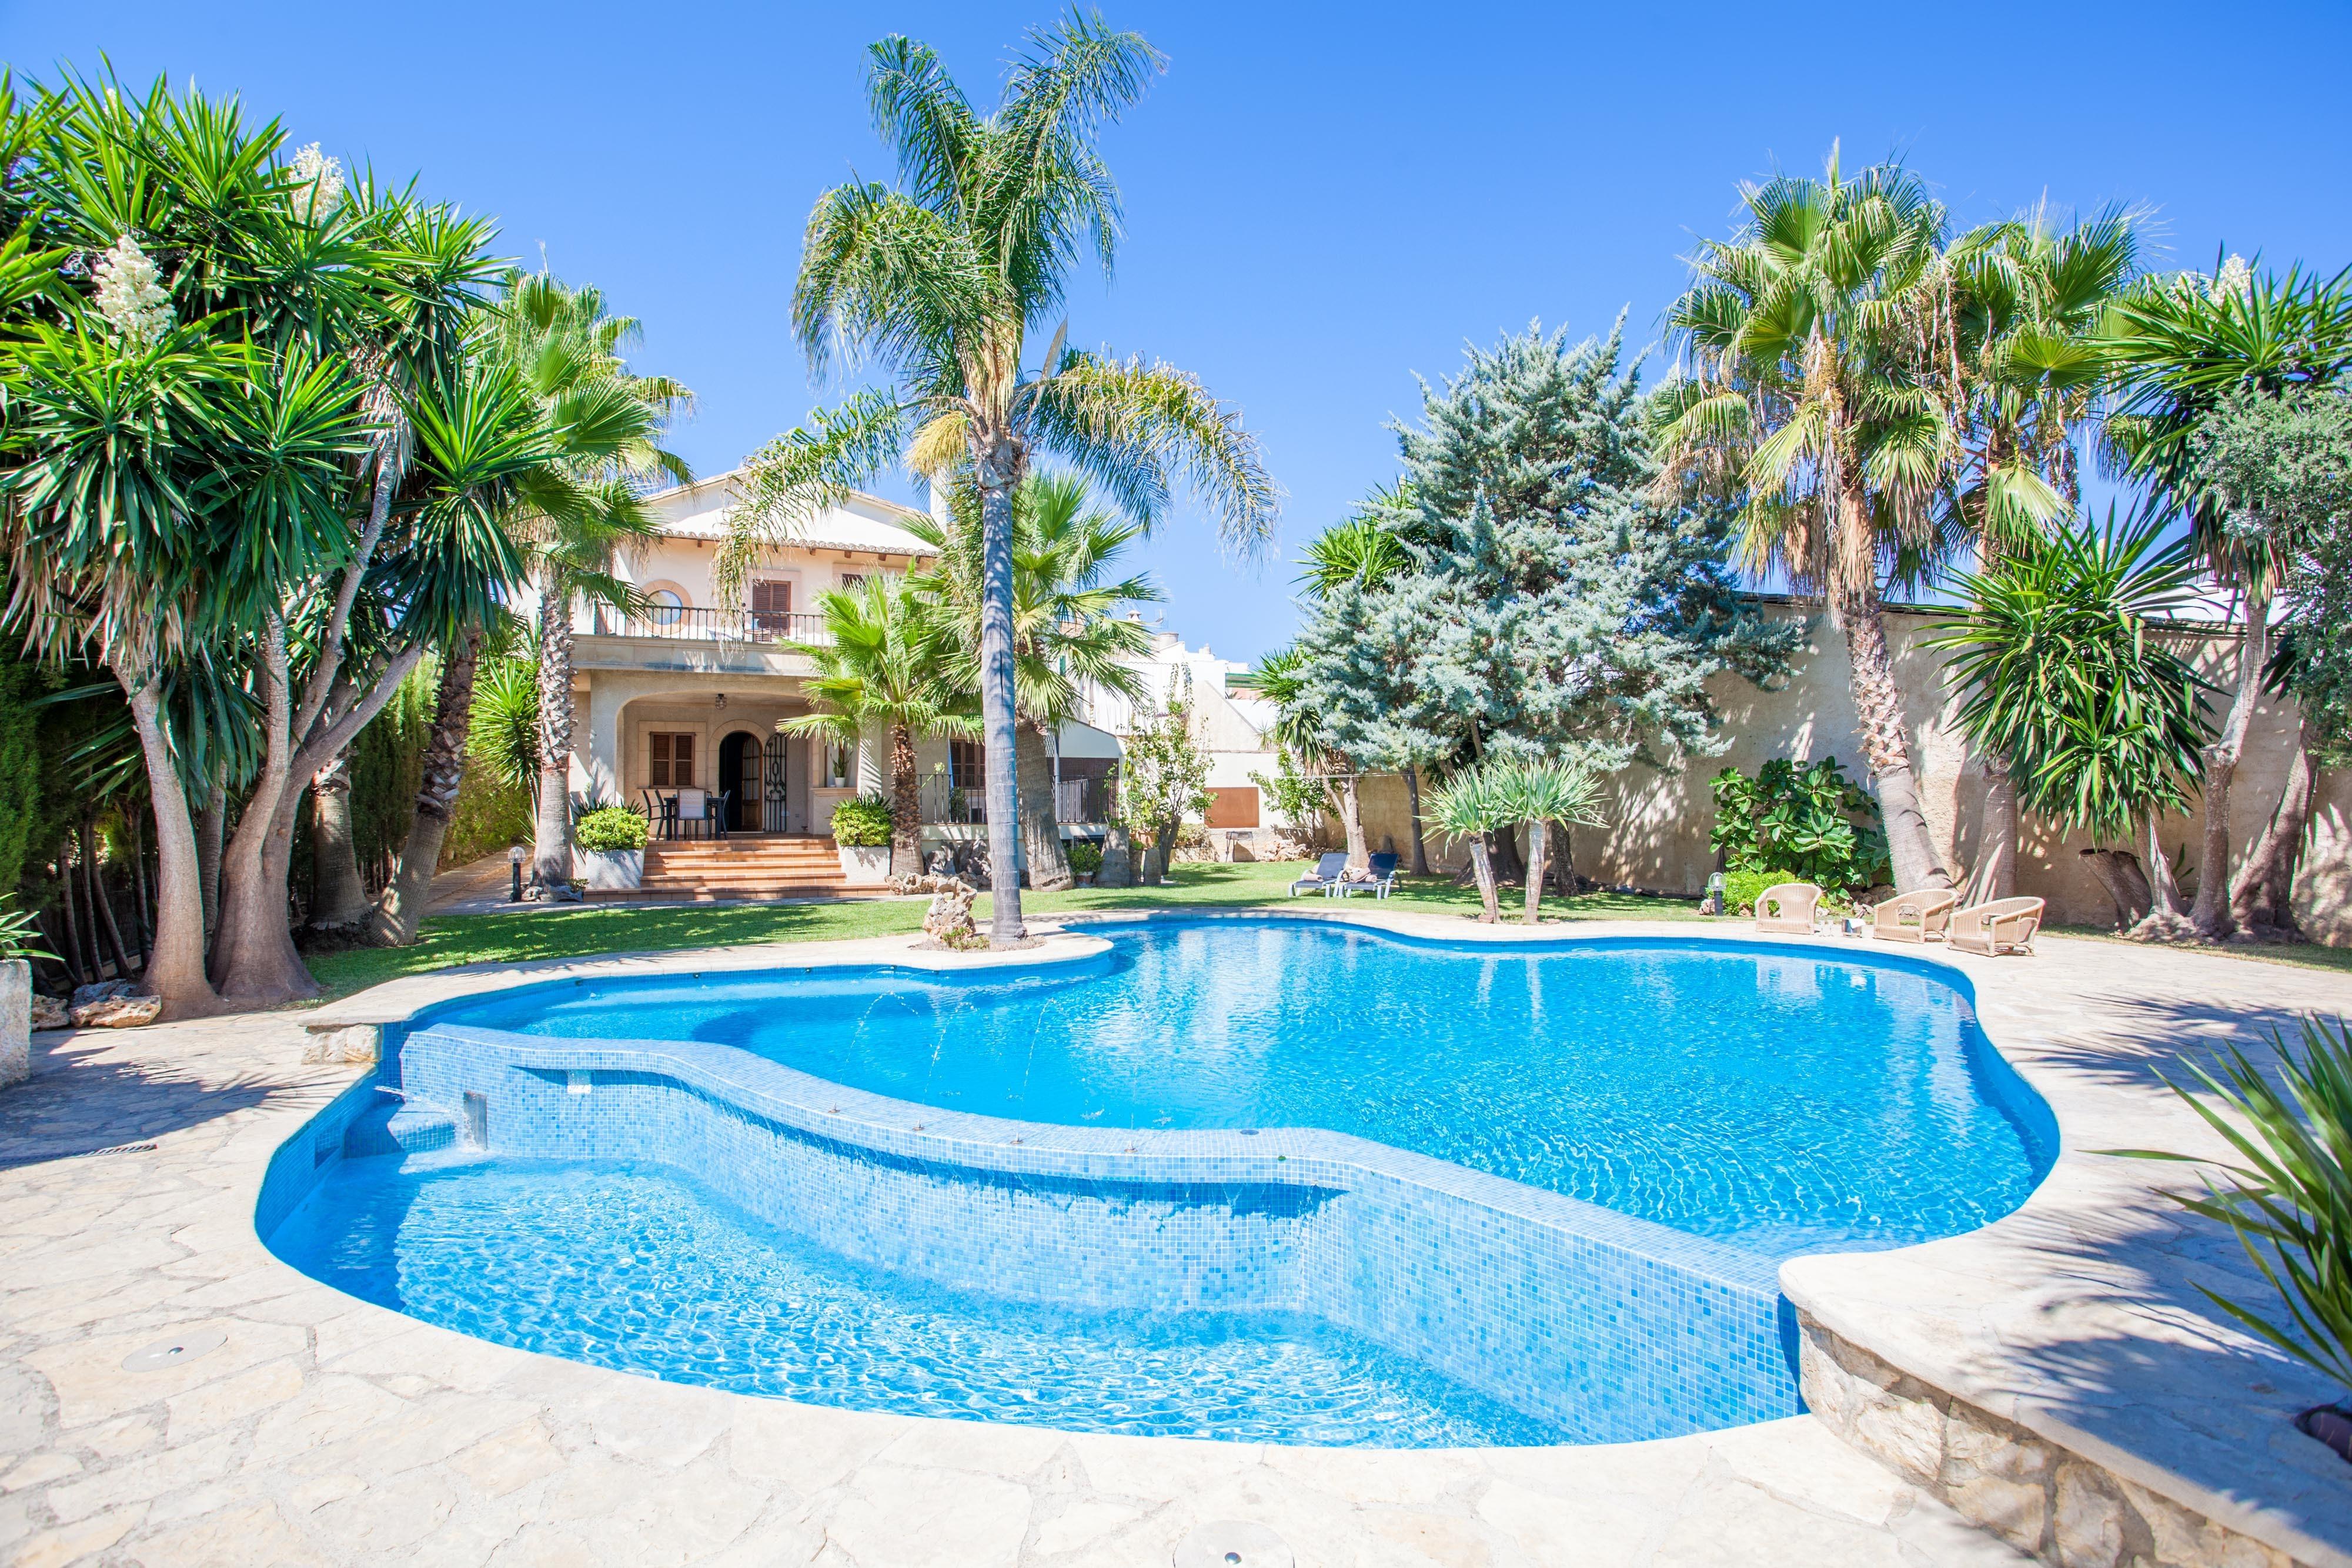 Property Image 2 - CAN GUAL - Wonderful villa with private pool in the center of the island. Free WiFi